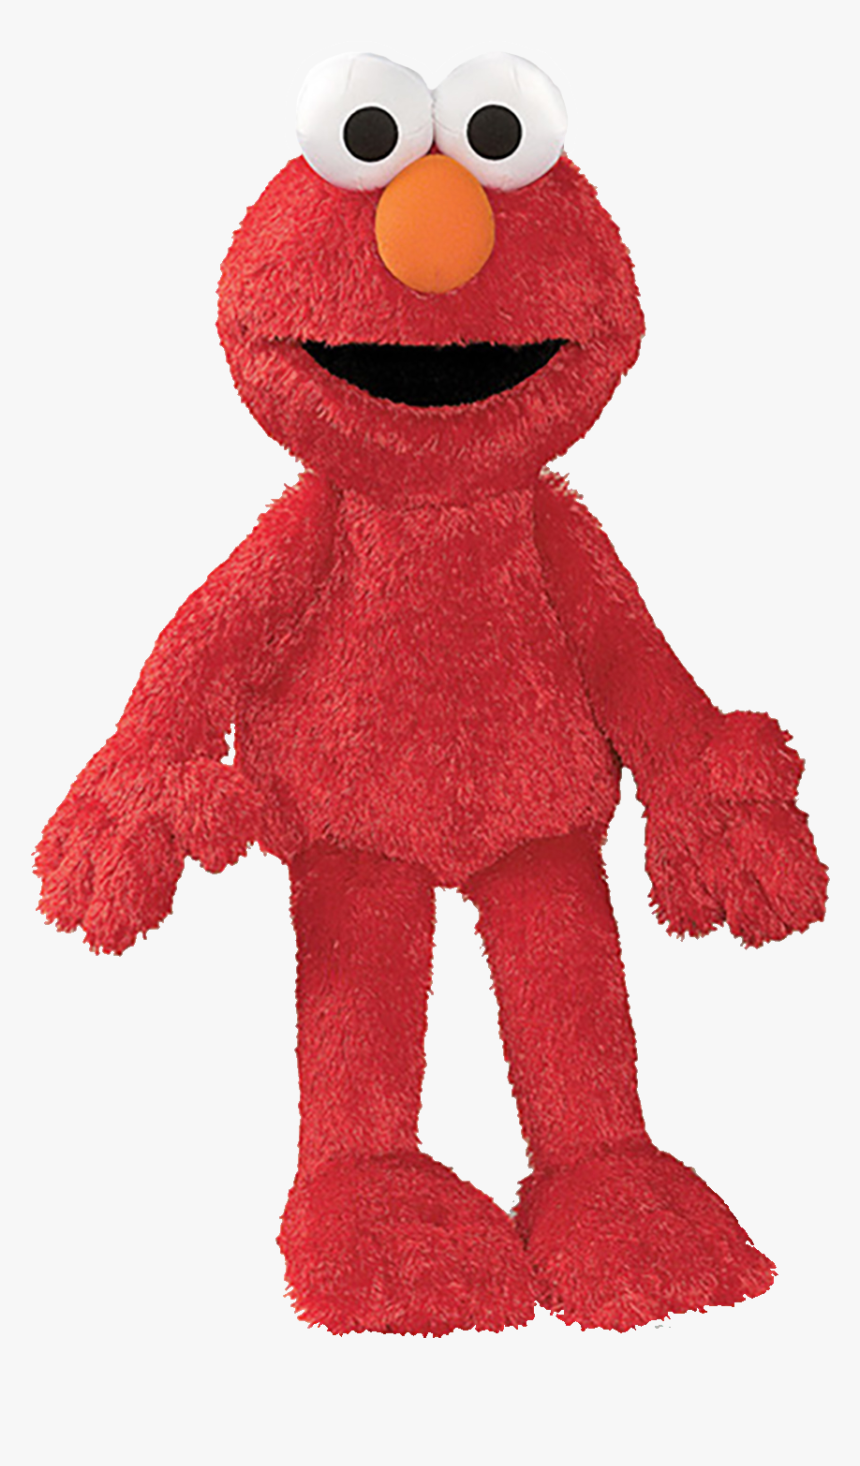 Anthonythepepsifan Roblox Wikia Sesame Street Elmo Plush Toy Hd Png Download Kindpng - roblox toysmultipack roblox wikia fandom